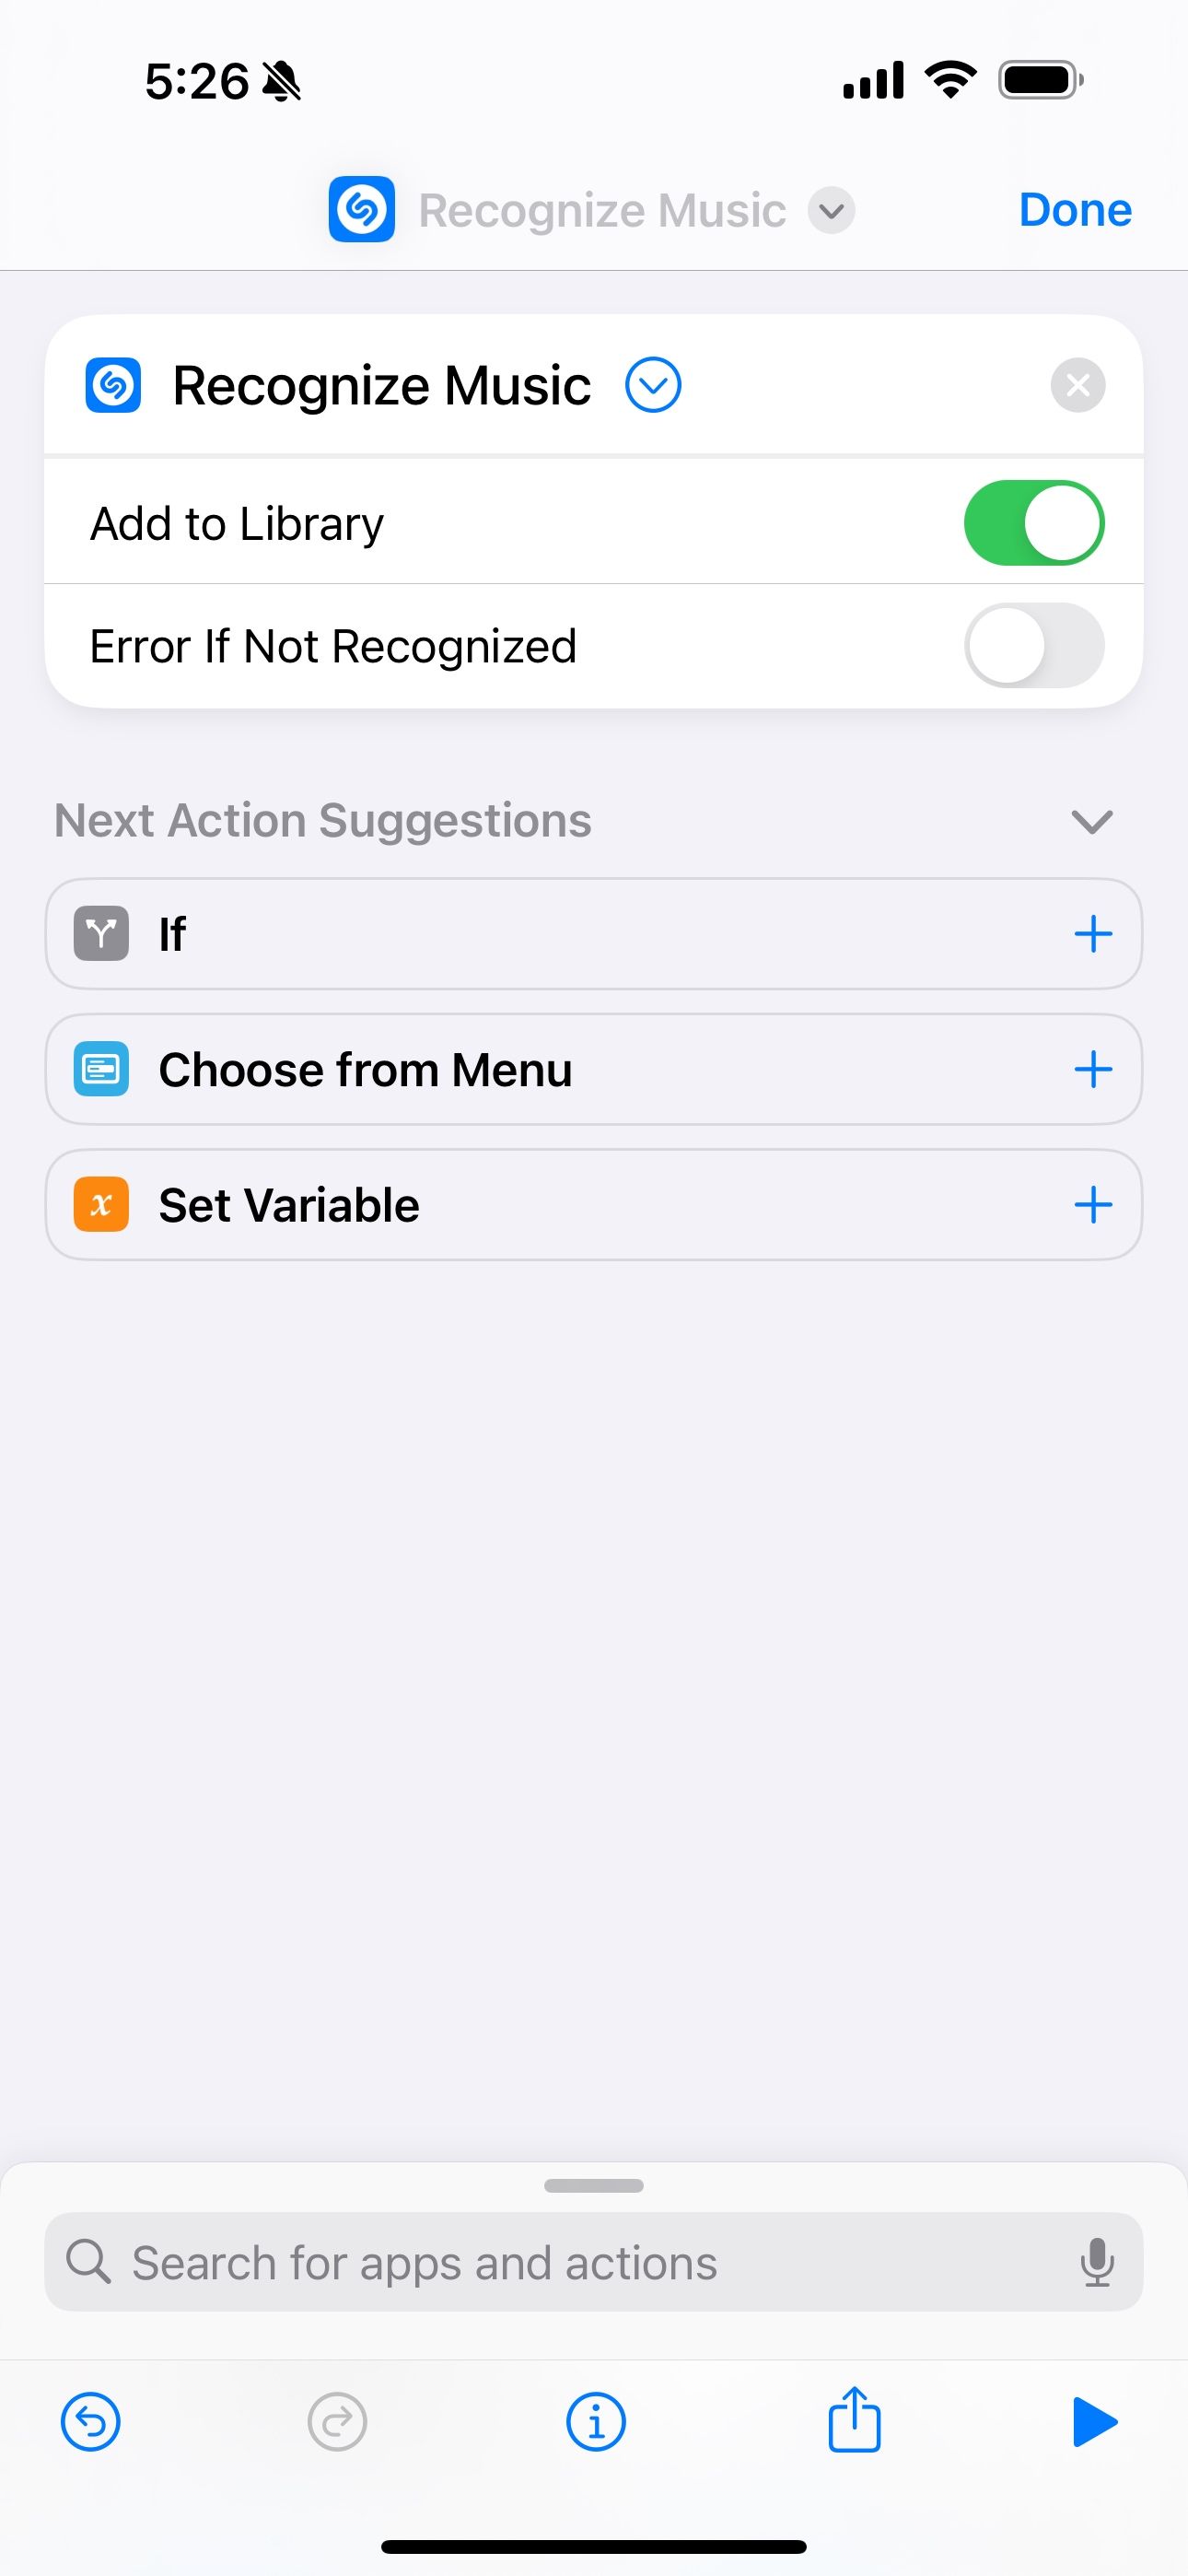 Recognize Music action in iOS Shortcuts